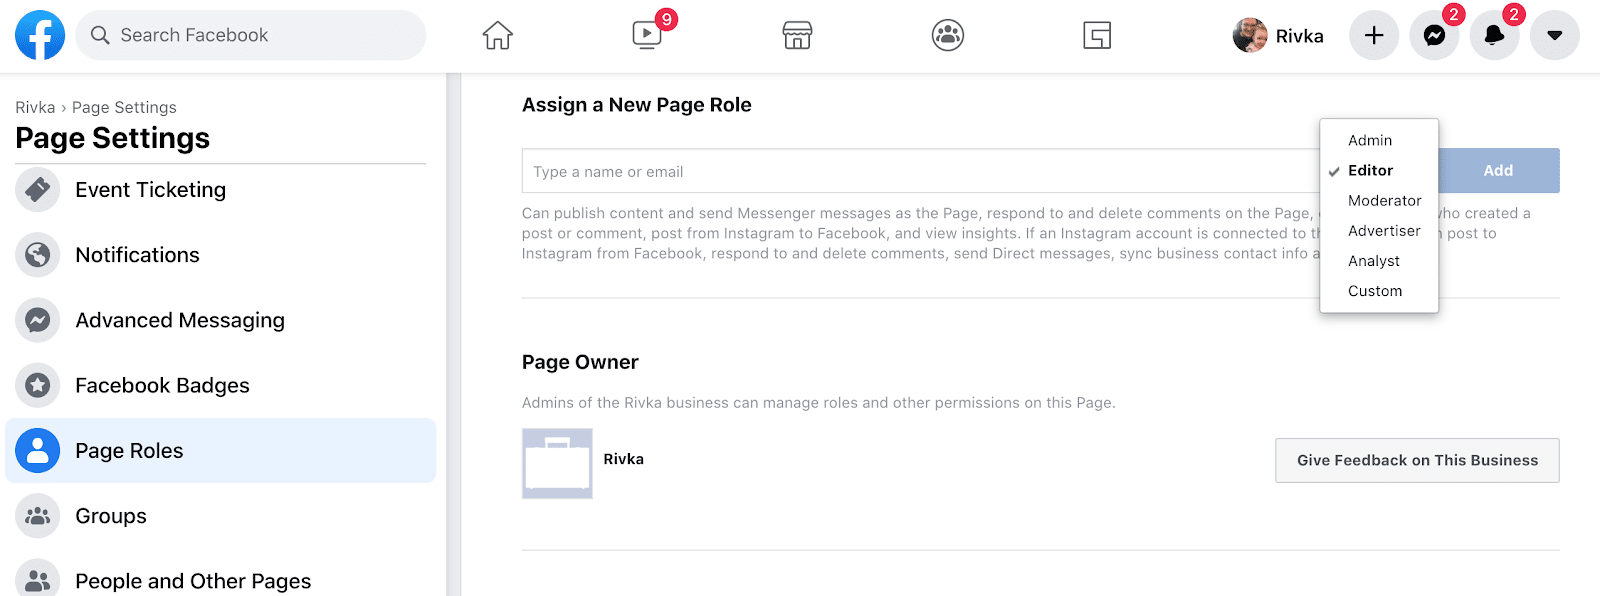 page settings and roles for social media policy